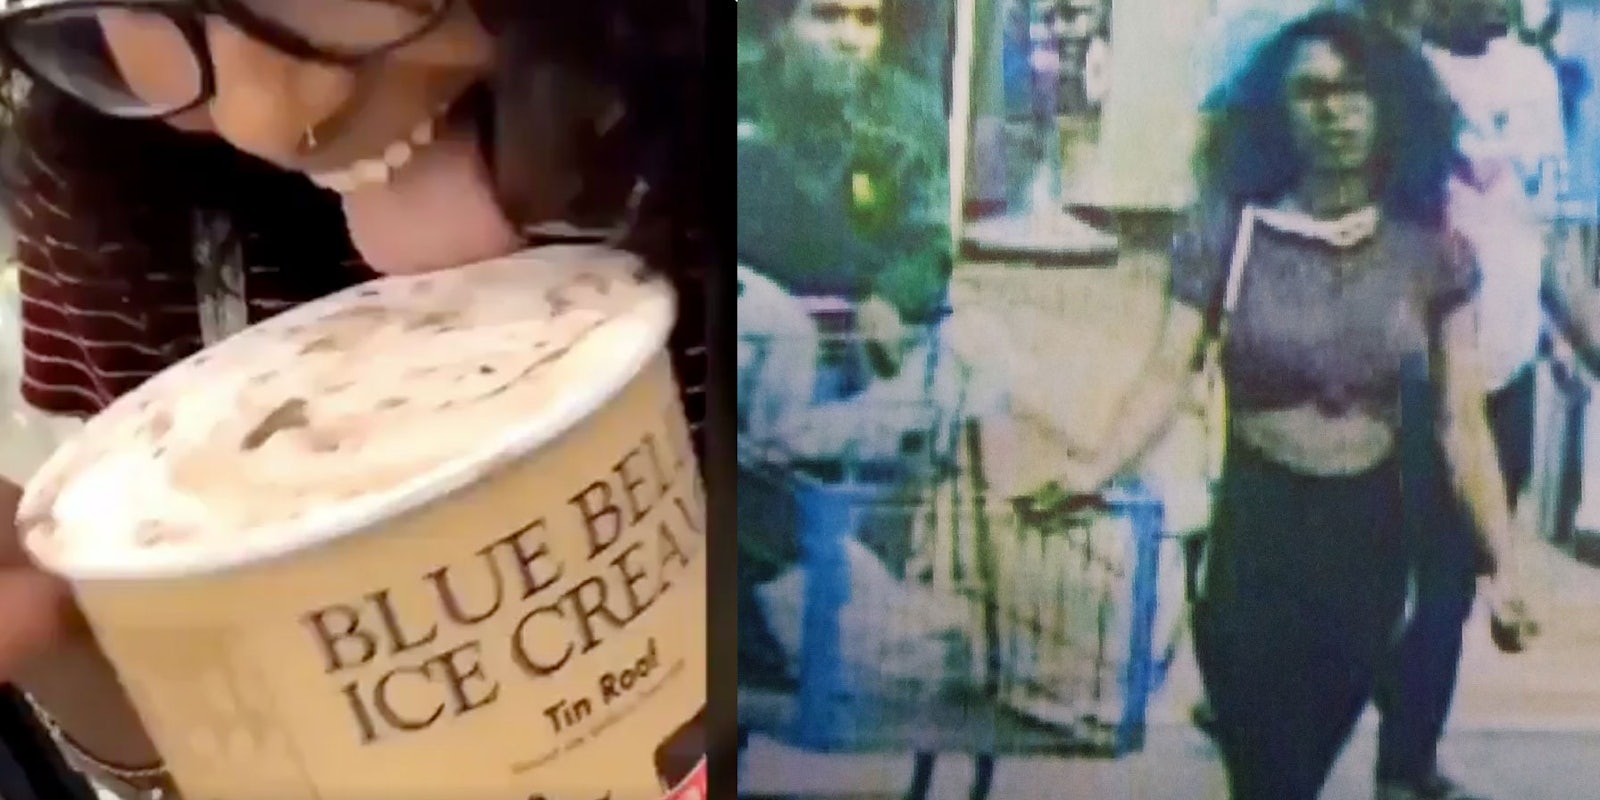 Left: screenshot of the woman licking a Blue Bell Tin Roof ice cream; Right: the woman is seen leaving the scene